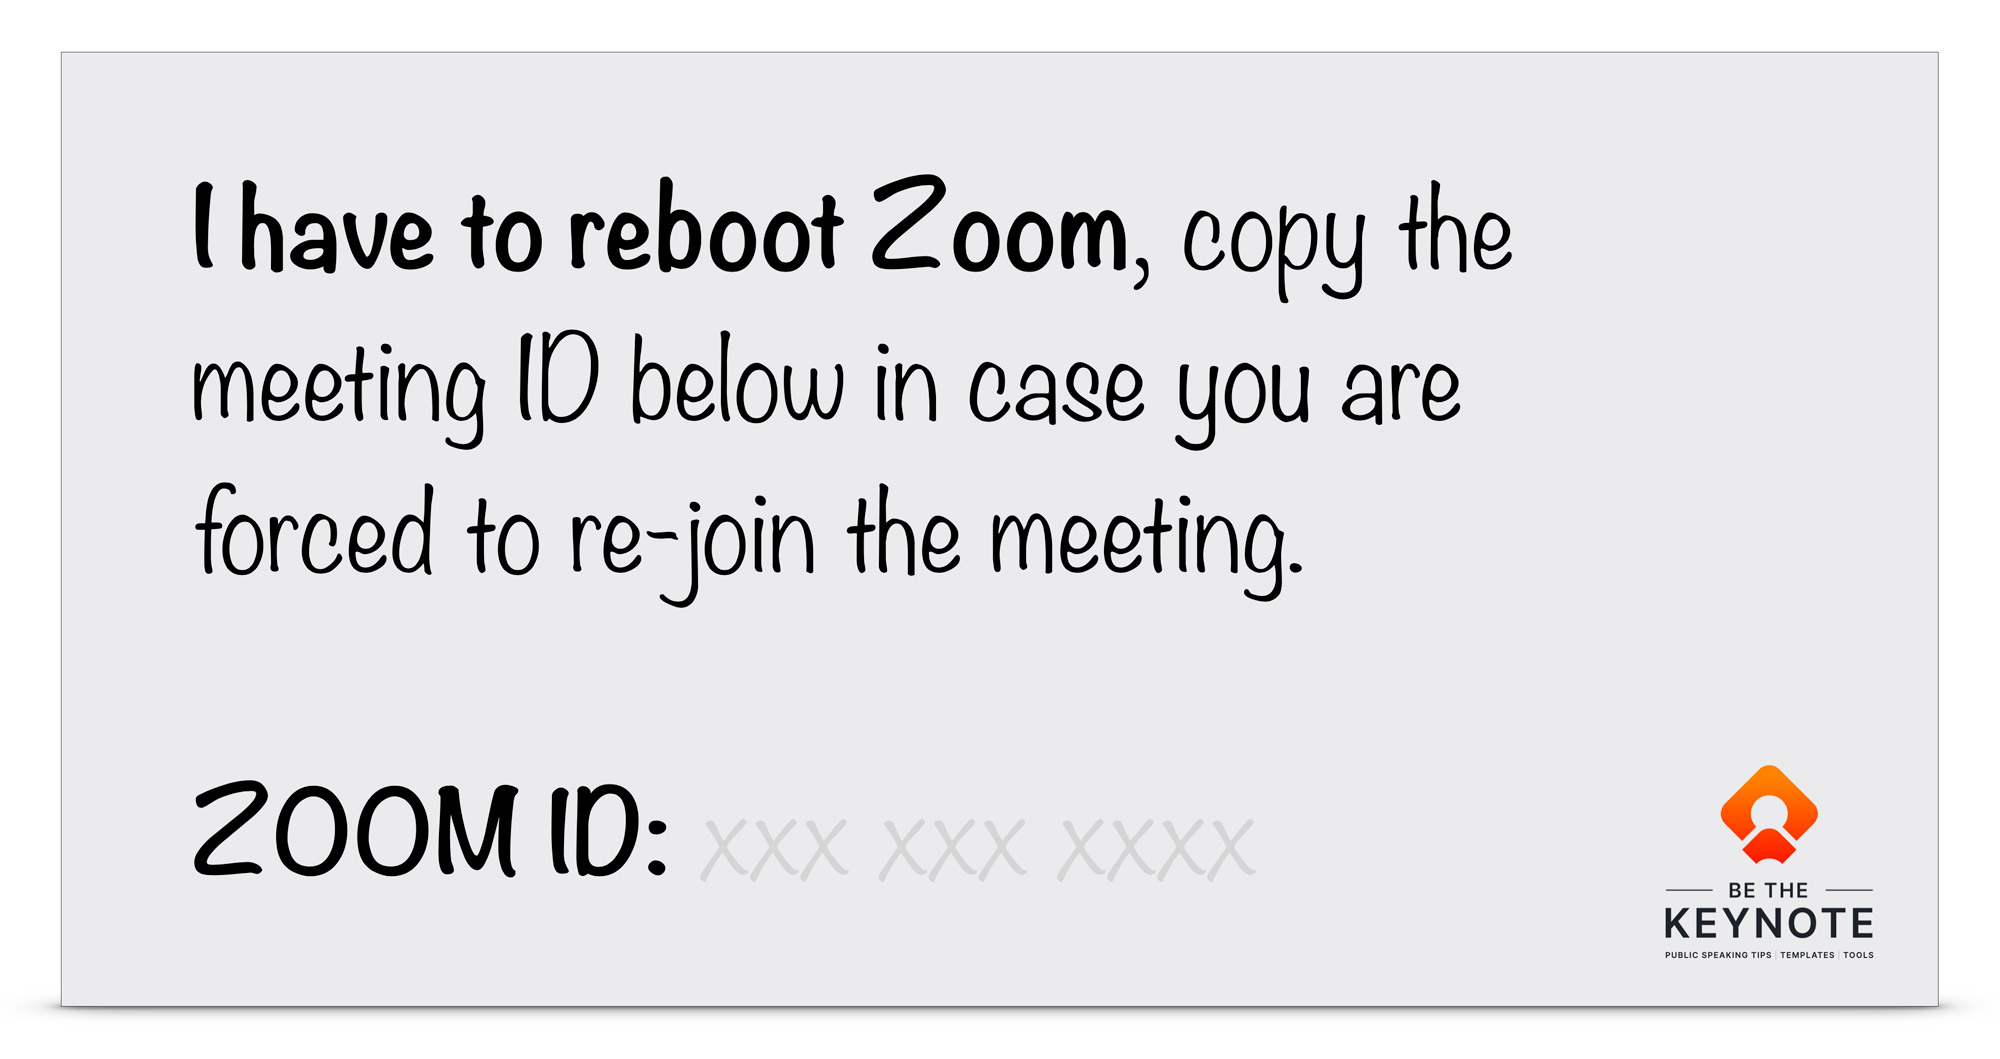 How to communicate when you have to reboot Zoom